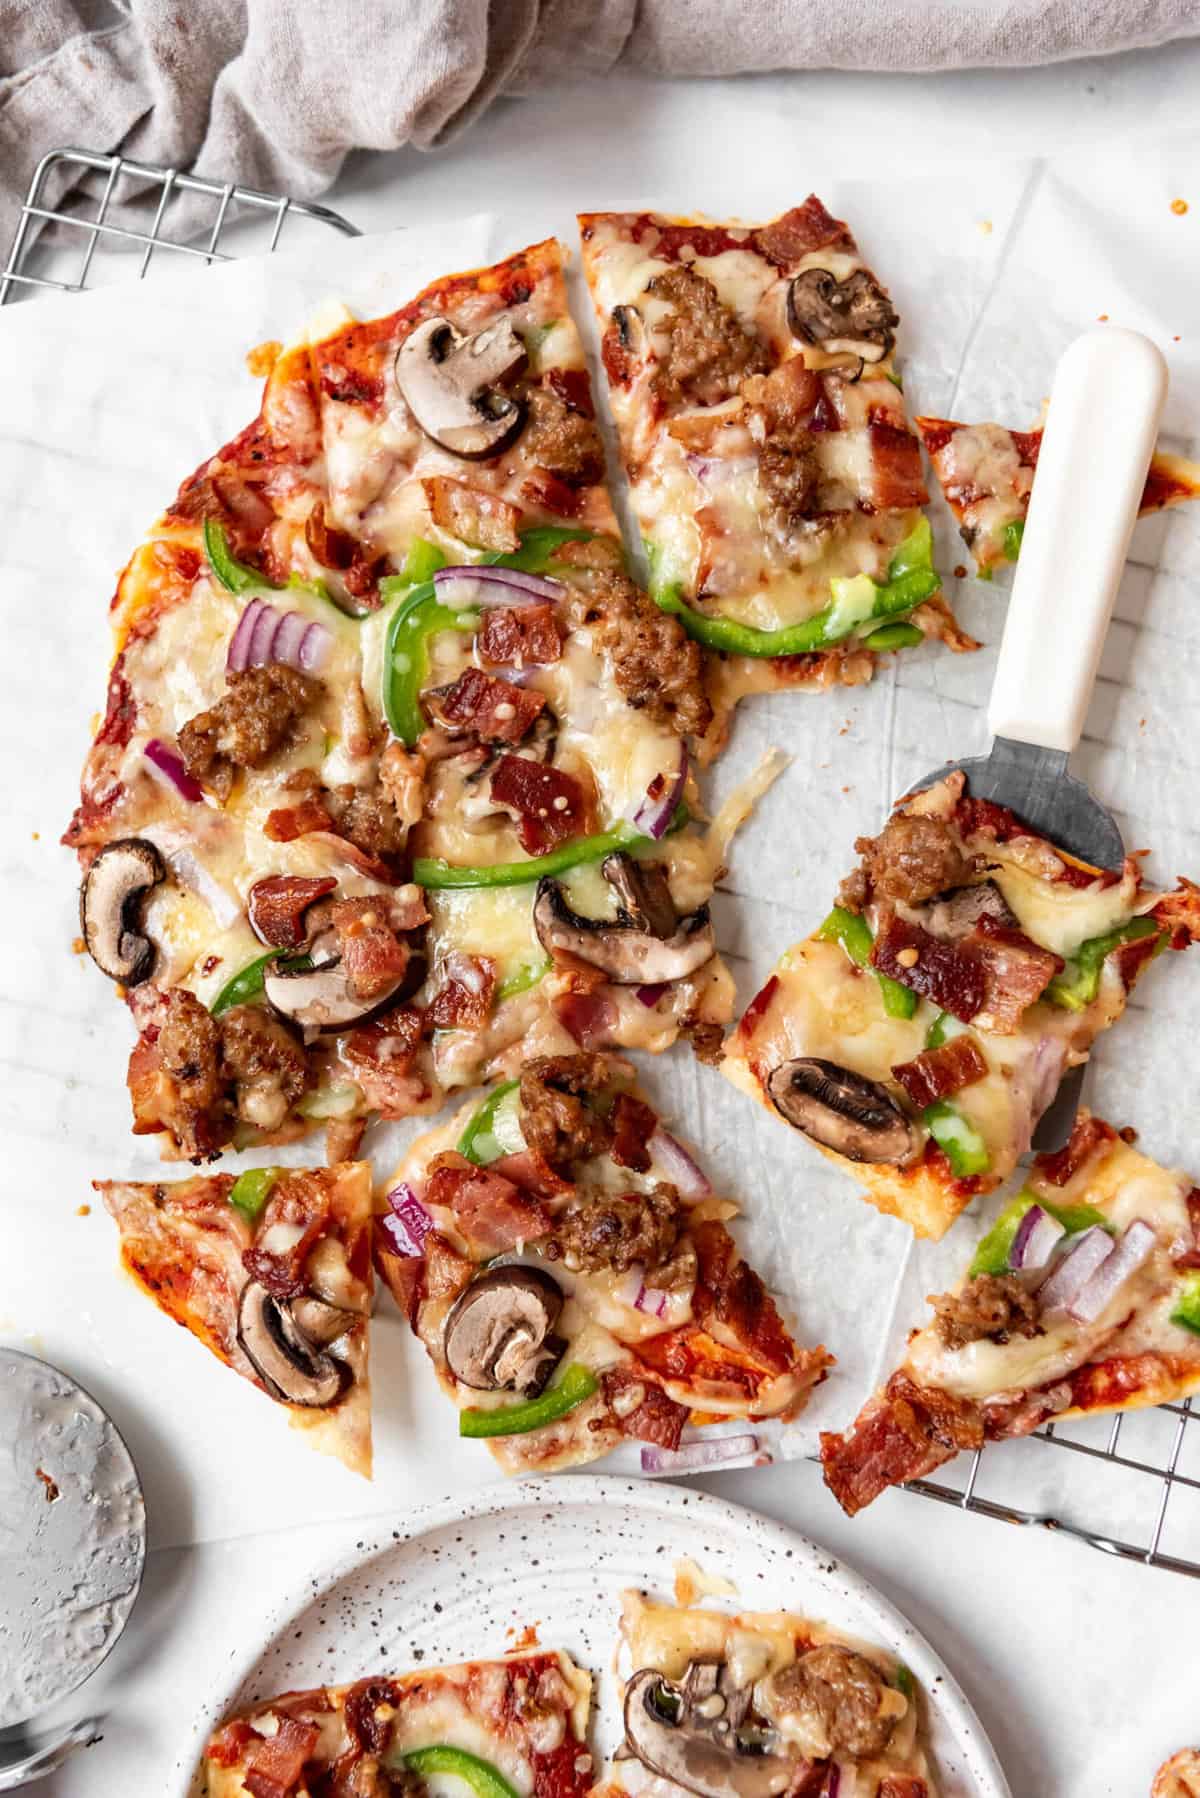 A deluxe St. Louis-style pizza cut into squares with one piece on a white handled spatula.